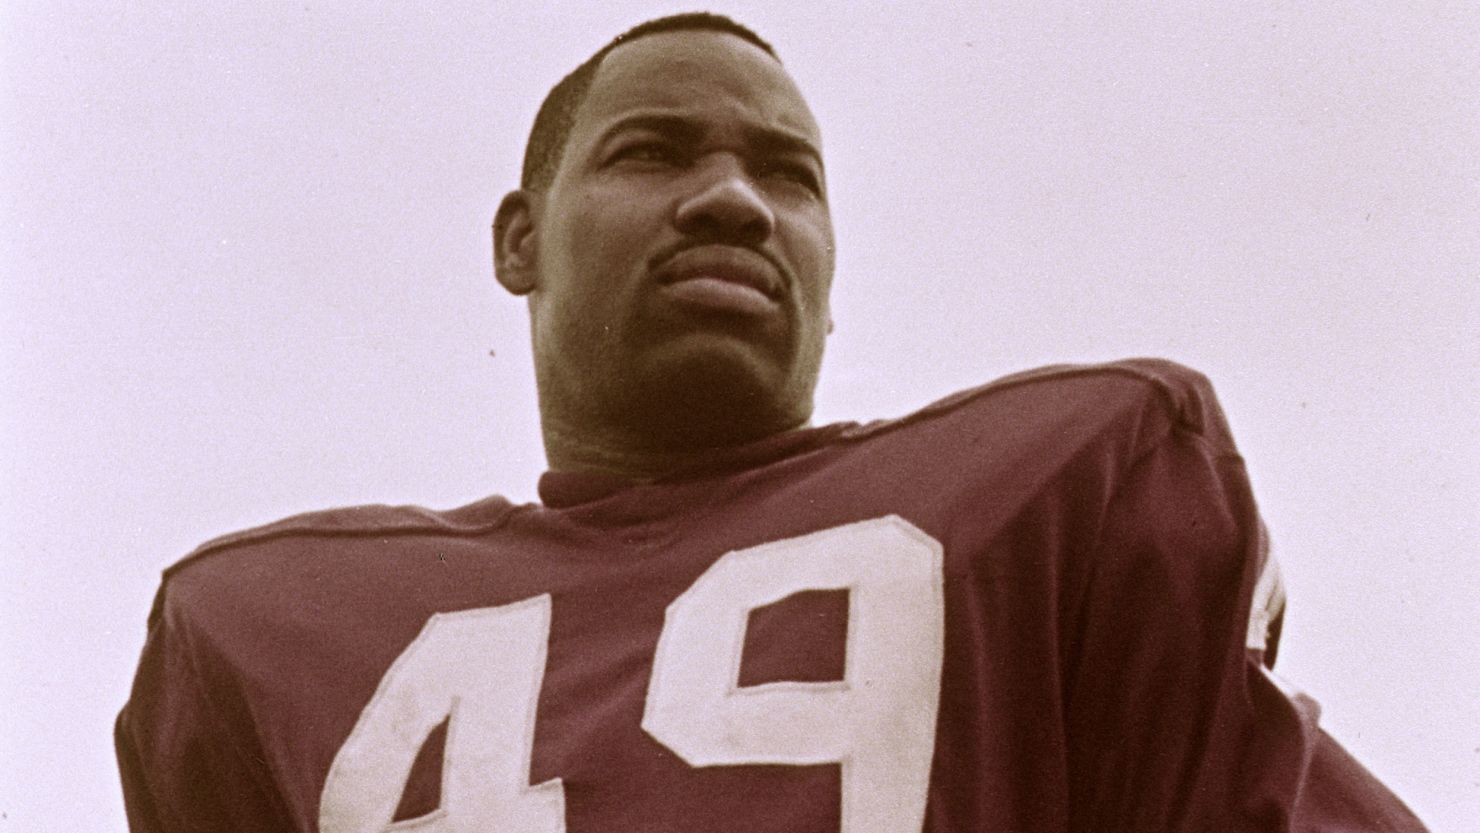 Hall of Fame wide receiver Bobby Mitchell of the Washington Redskins in 1966.  